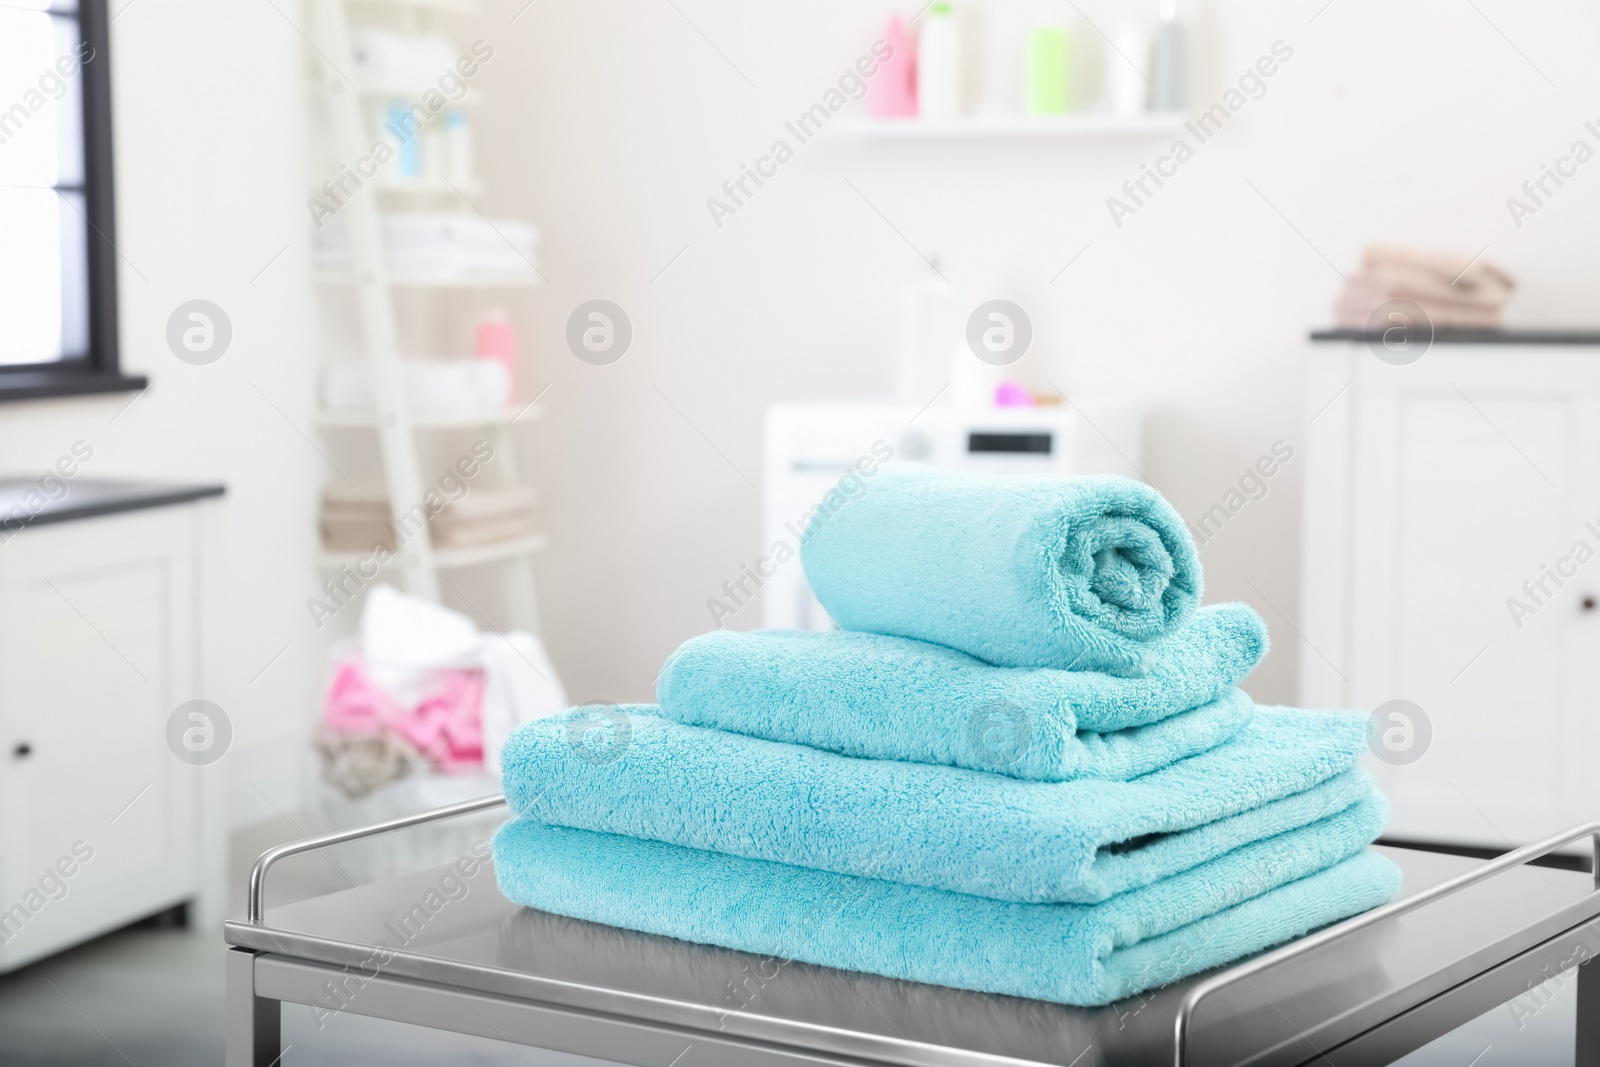 Photo of Soft bath towels on table against blurred background, space for text